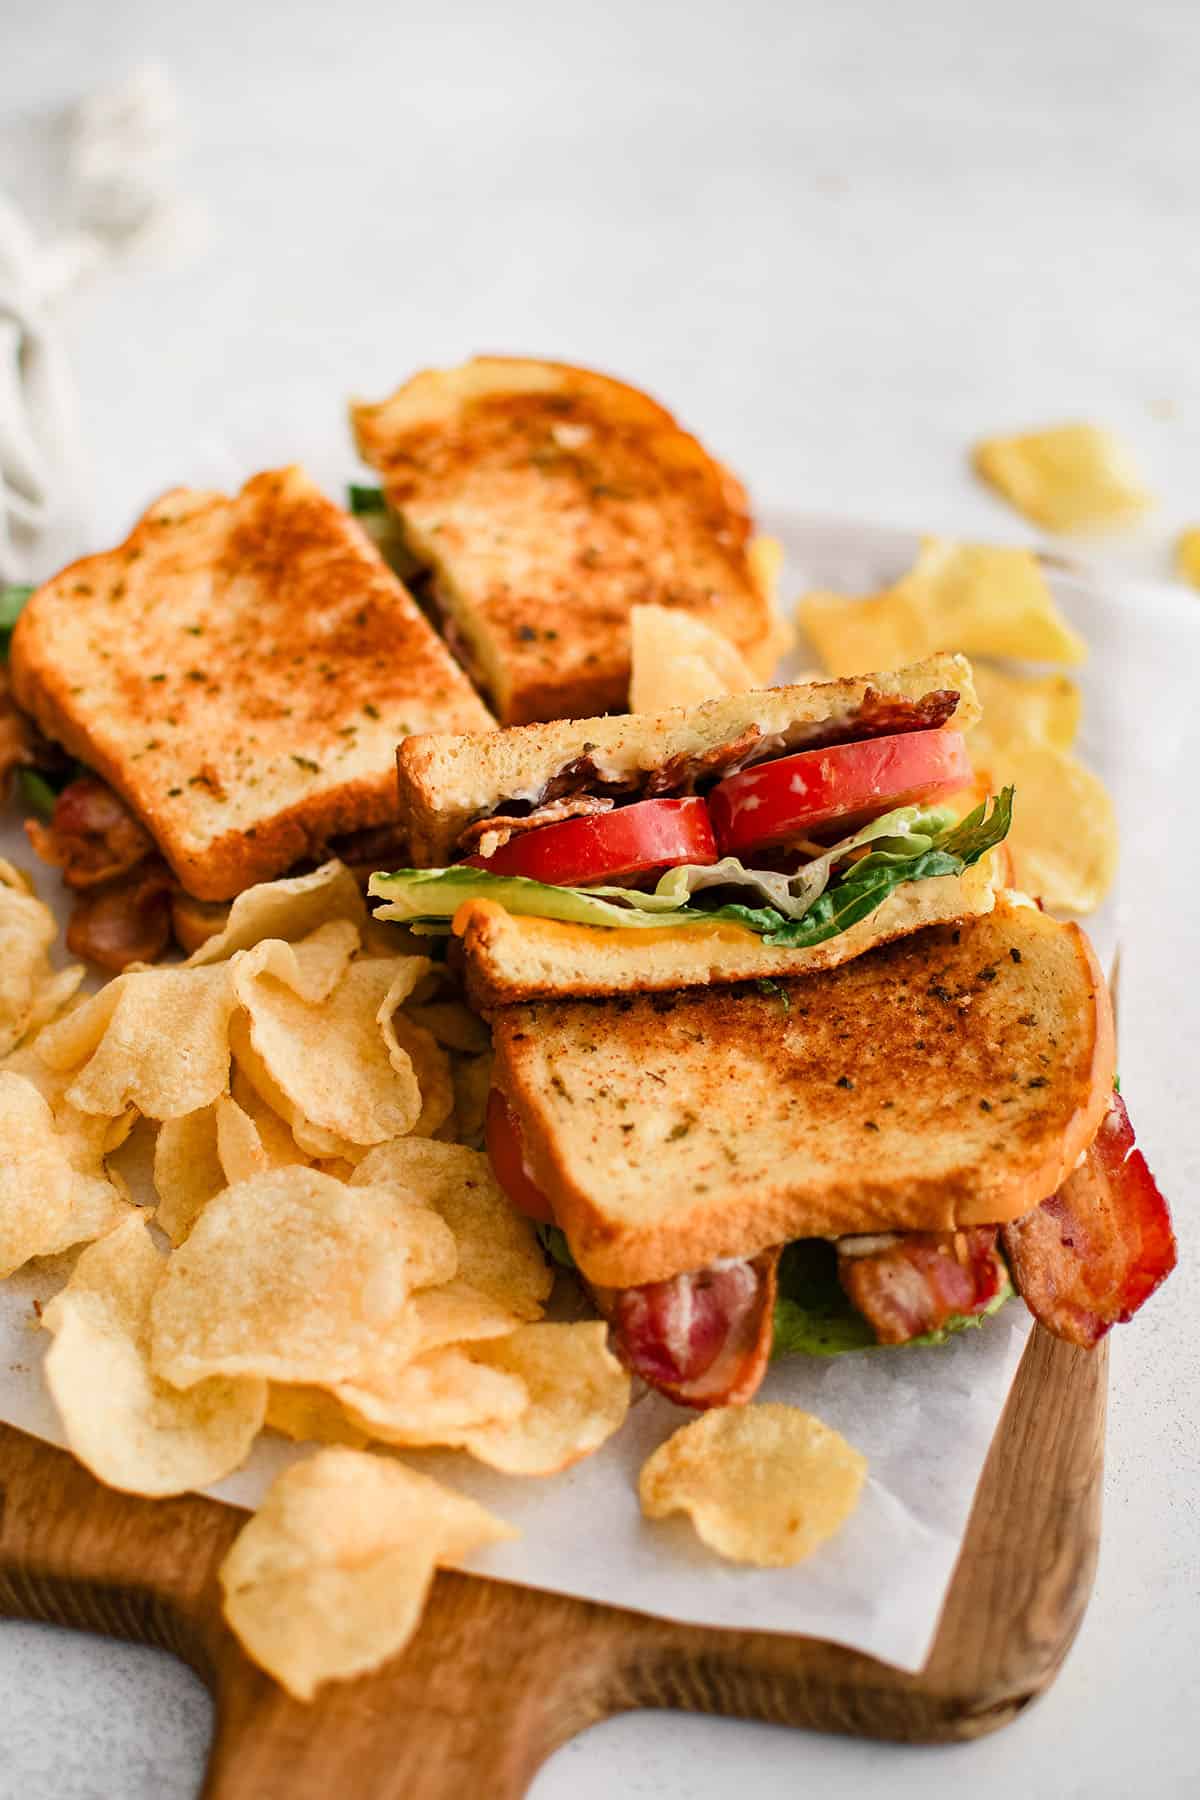 two blt sandwiches on a plate with chips